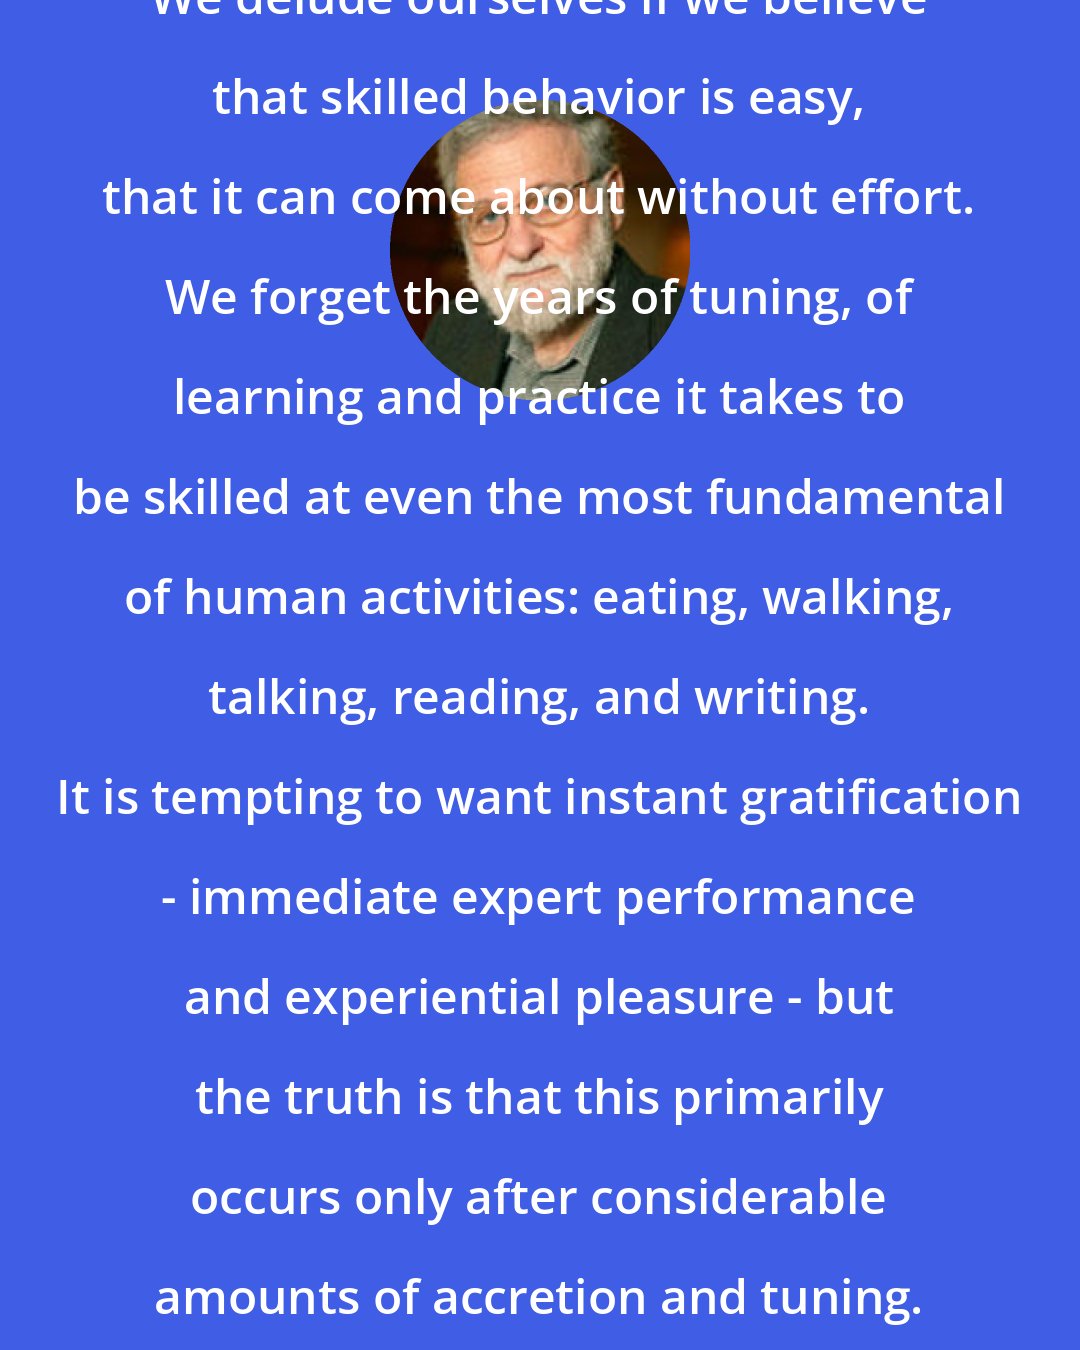 Donald A. Norman: We delude ourselves if we believe that skilled behavior is easy, that it can come about without effort. We forget the years of tuning, of learning and practice it takes to be skilled at even the most fundamental of human activities: eating, walking, talking, reading, and writing. It is tempting to want instant gratification - immediate expert performance and experiential pleasure - but the truth is that this primarily occurs only after considerable amounts of accretion and tuning.